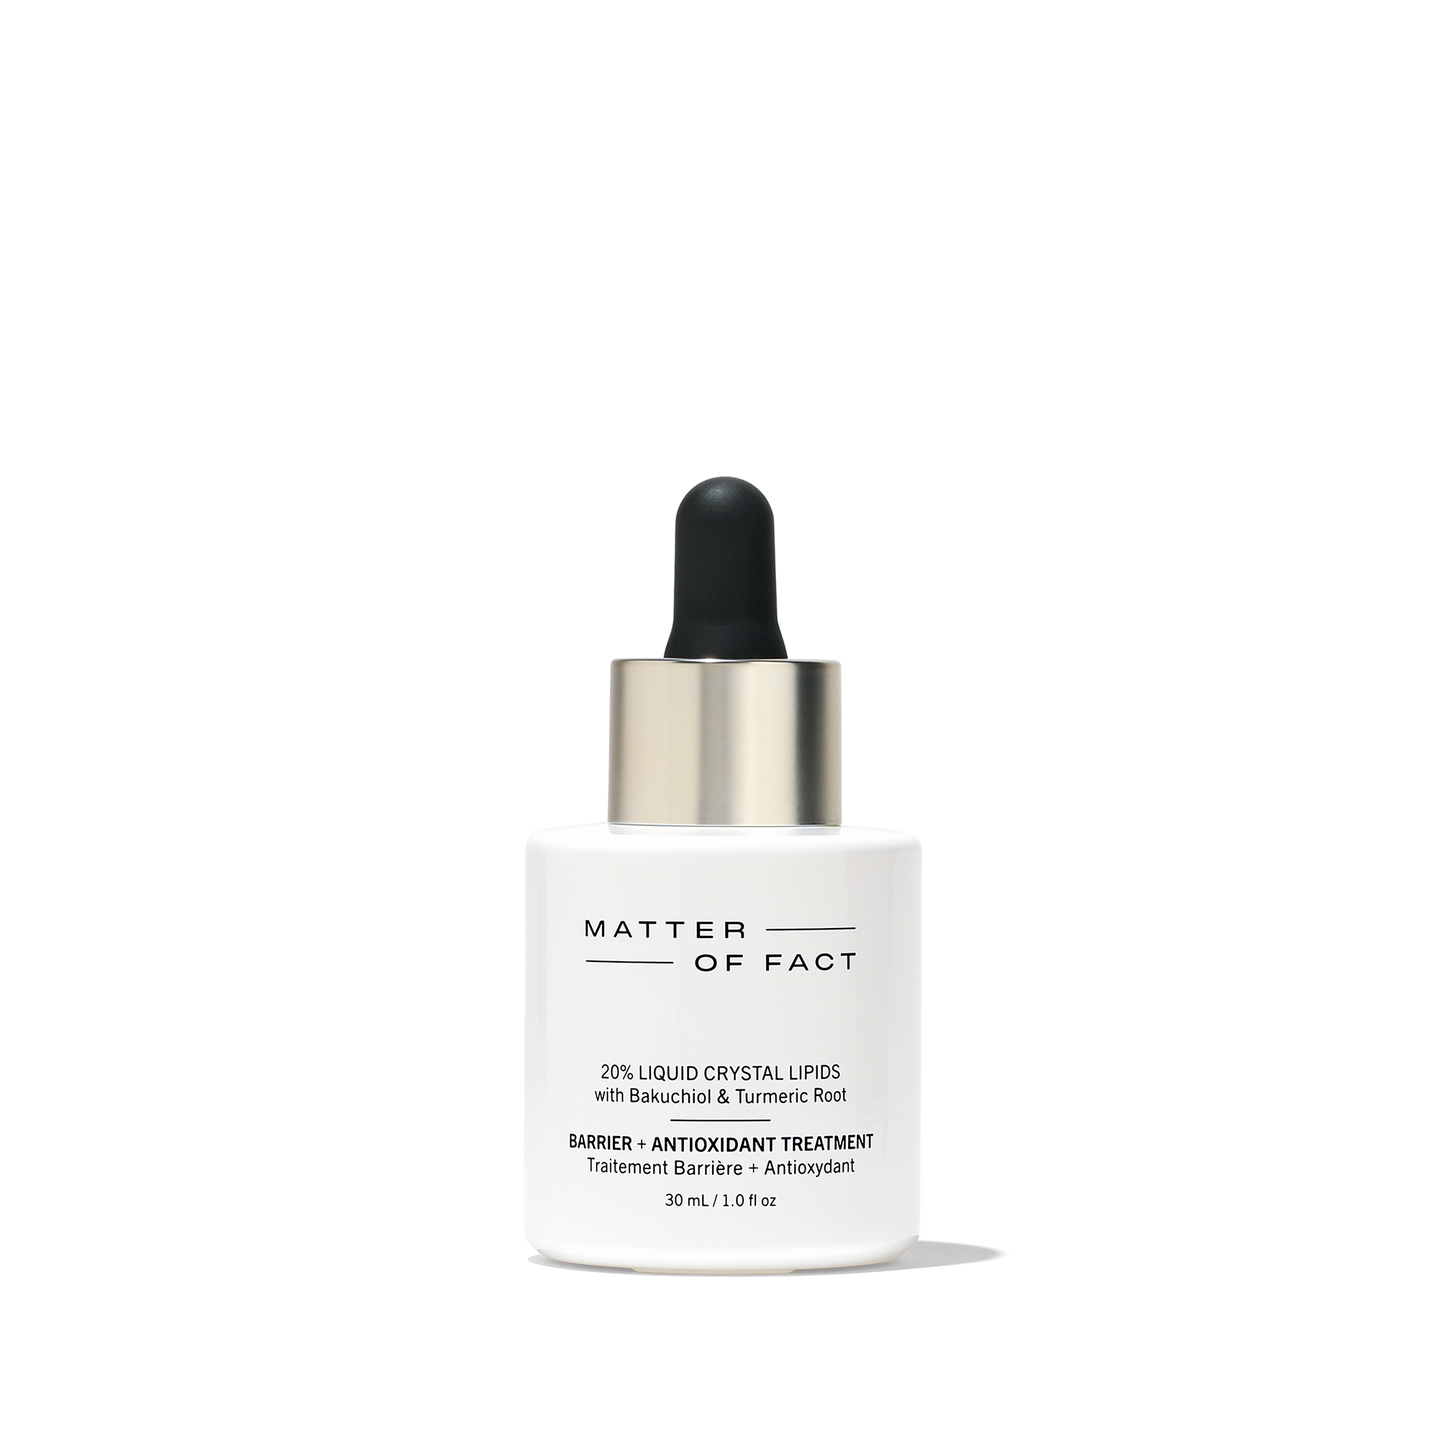 MATTER OF FACT SKINCARE BARRIER AND ANTIOXIDANT TREATMENT full-size product 30mL